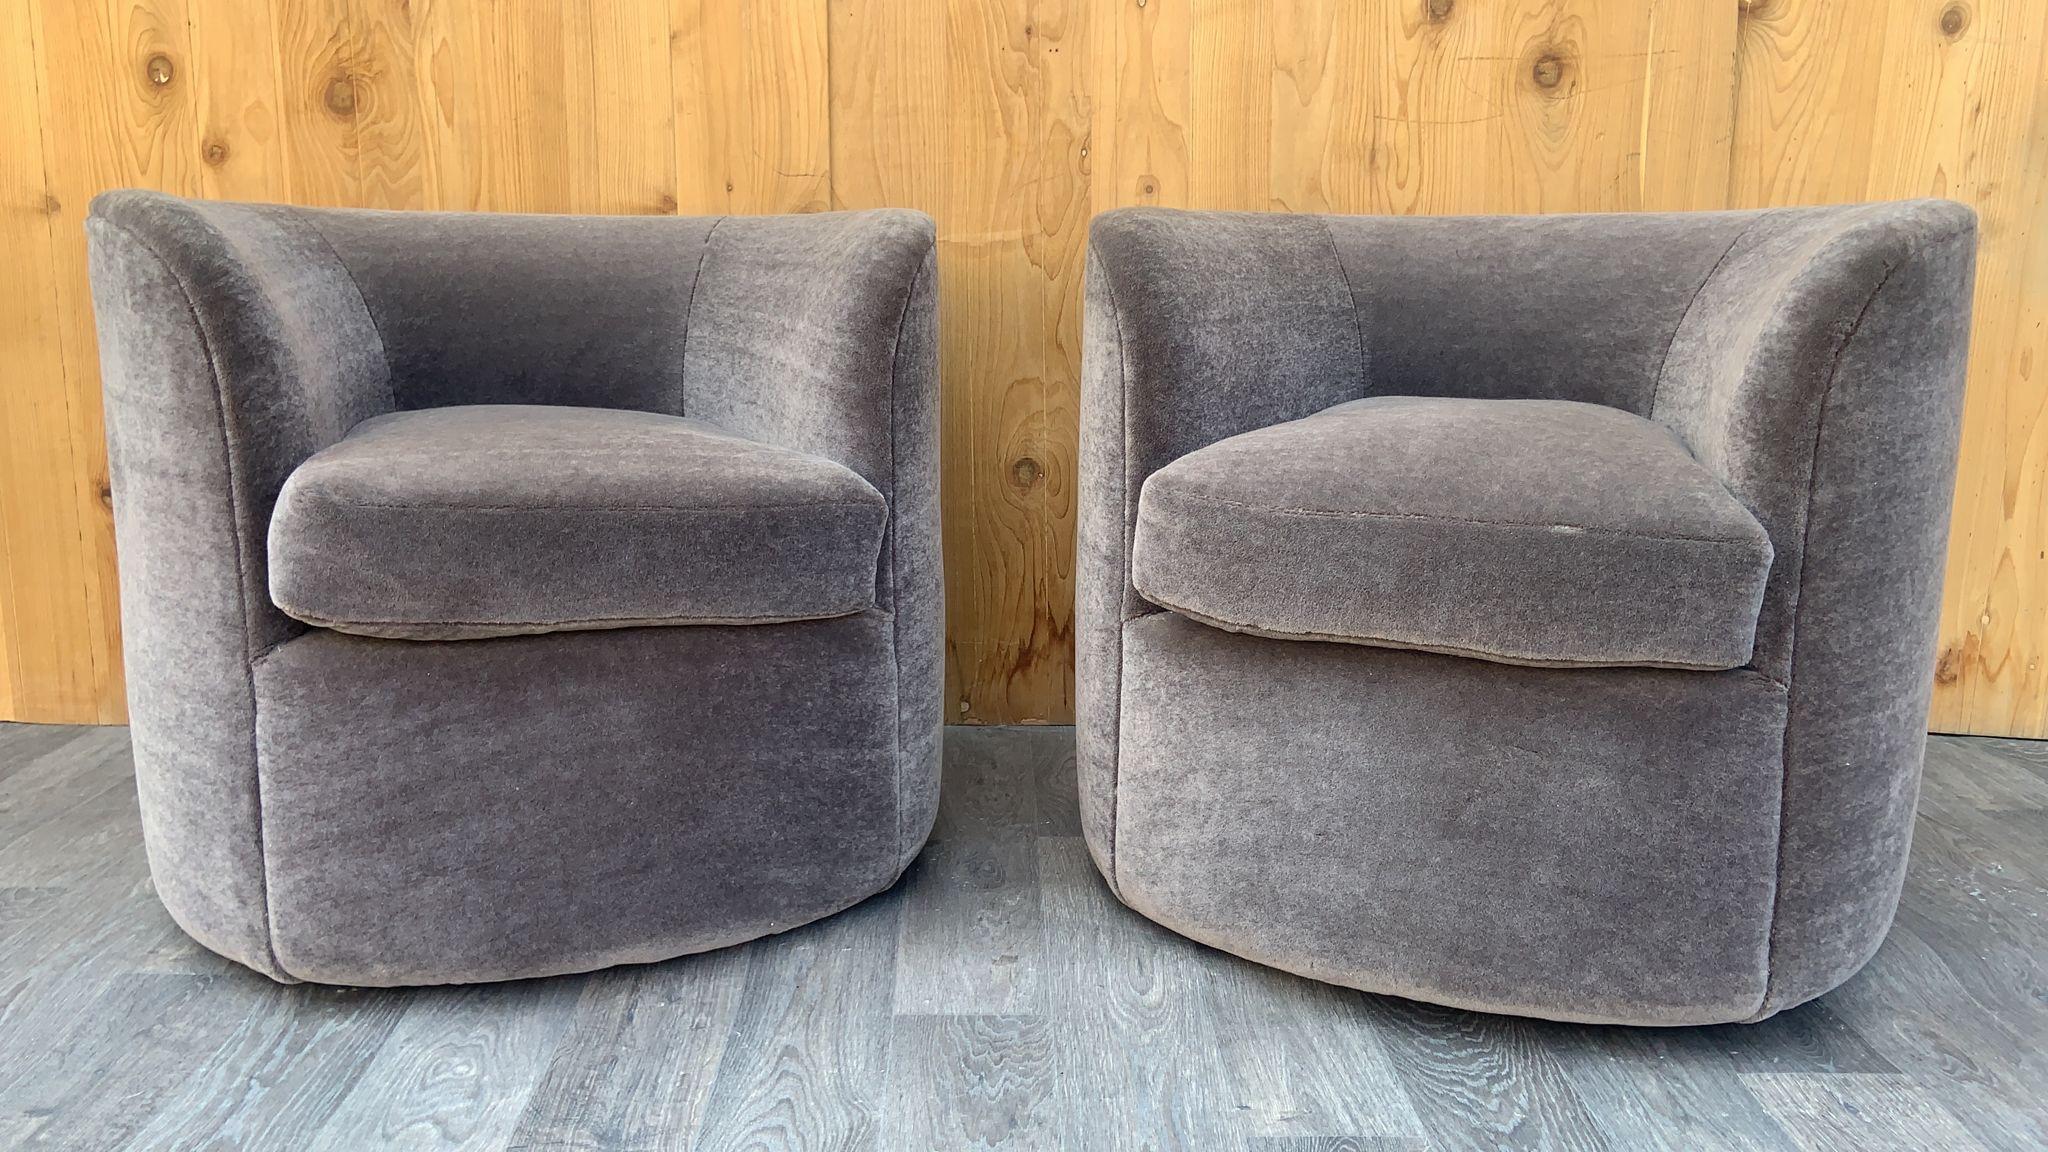 Mid Century Modern Faudet-Harrison Designed Continuous Swivel Tub Lounges for SCP England Newly Upholstered in a High End Plush “Smoked-Ash ”Italian Mohair - Pair 

Made in Norfolk, England for SCP.

Circa 2012

Dimensions:
H 27.5”
W 31.8”
D